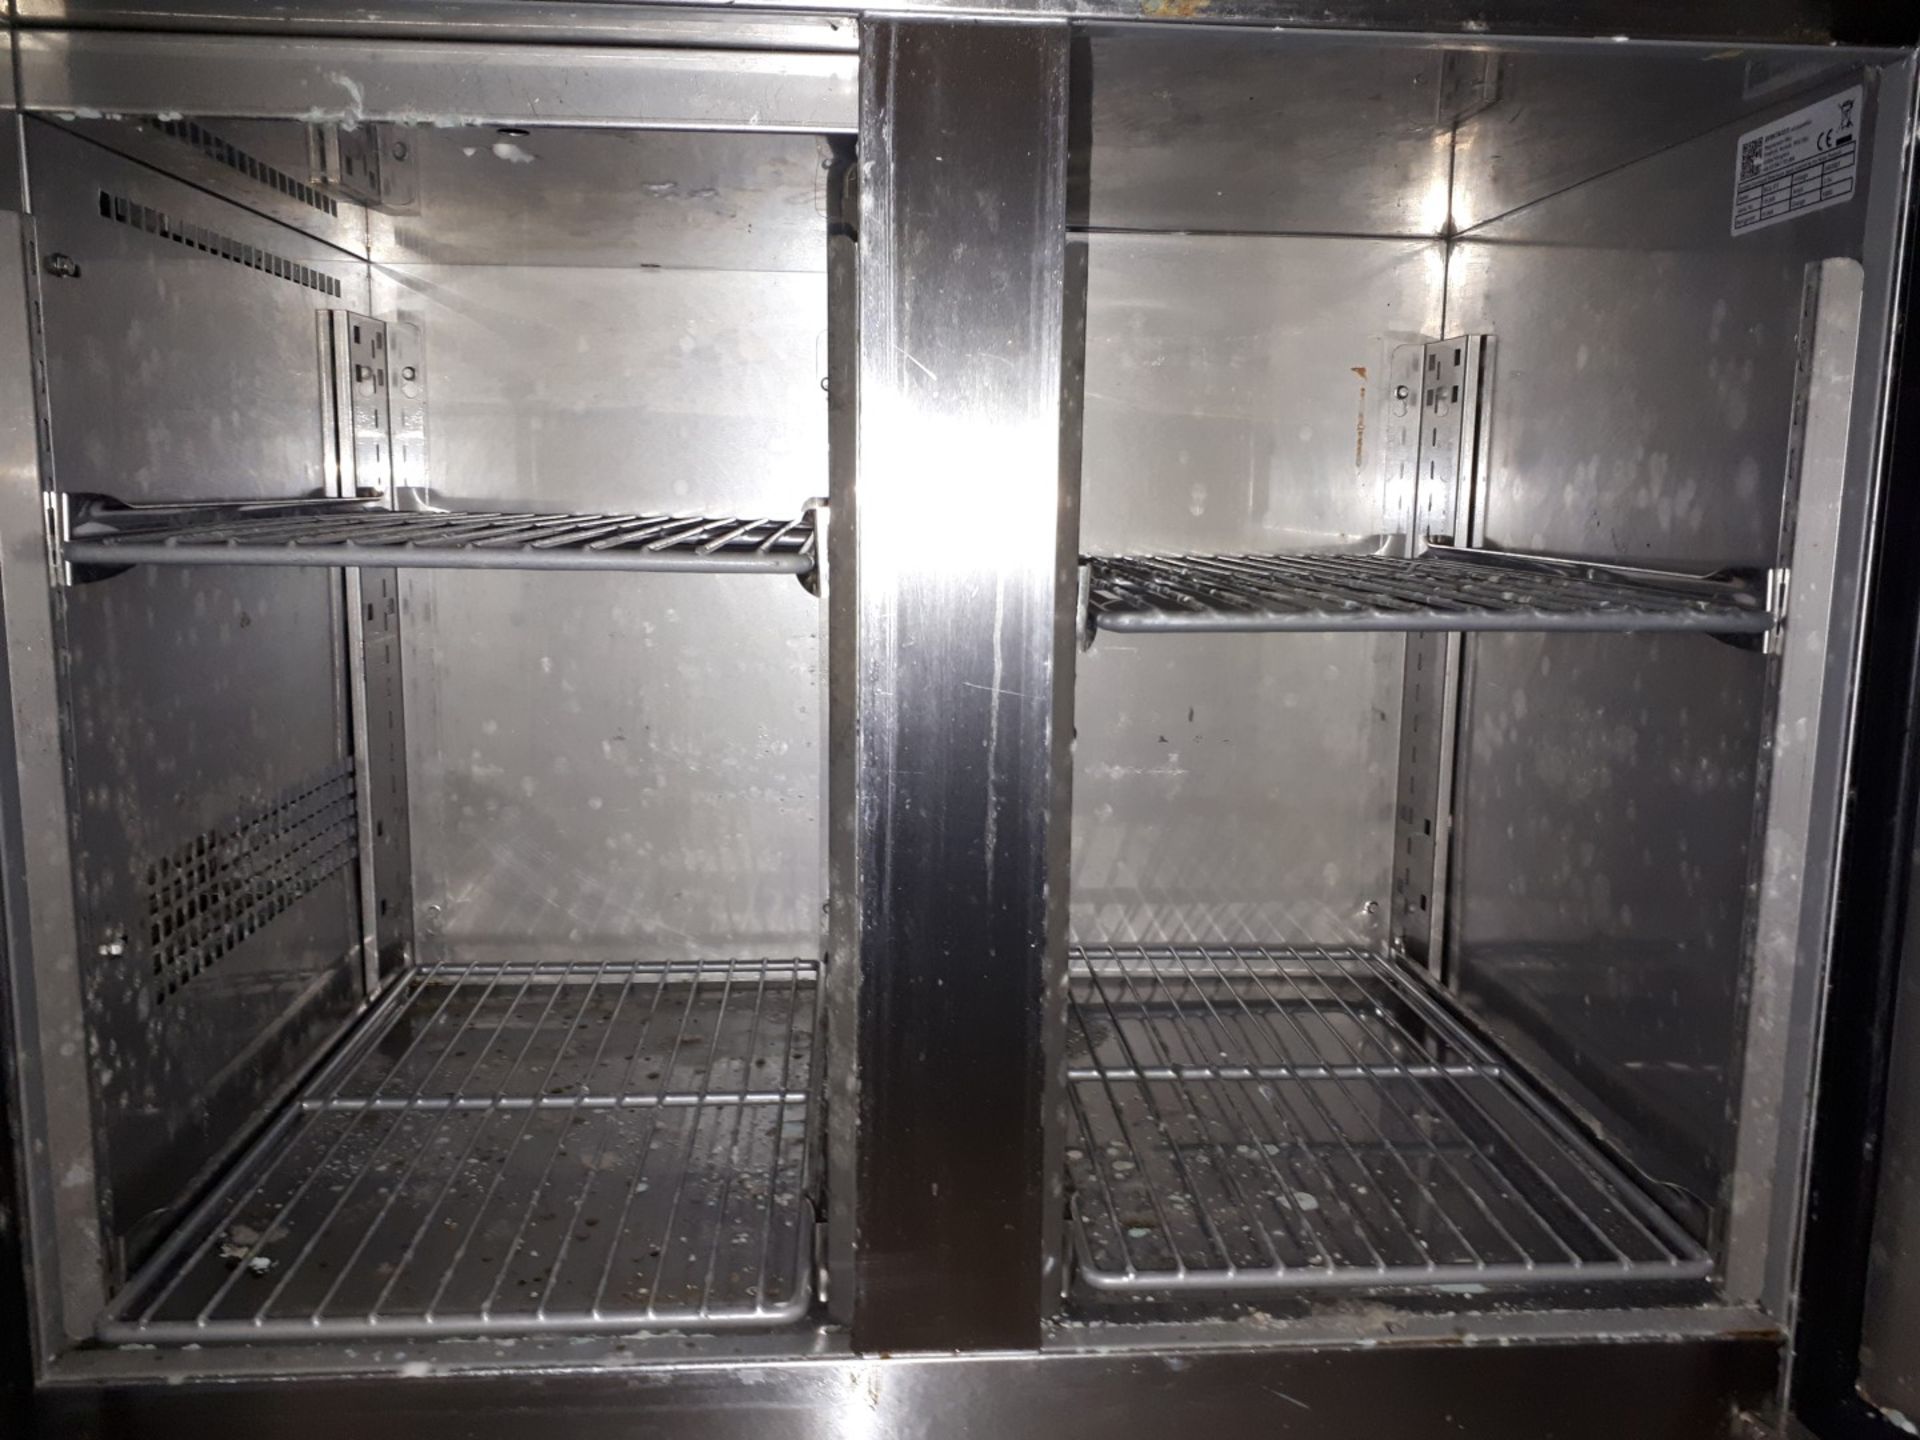 Precision MCU 211 Stainless Steel Two Door Counter Fridge - Image 3 of 4